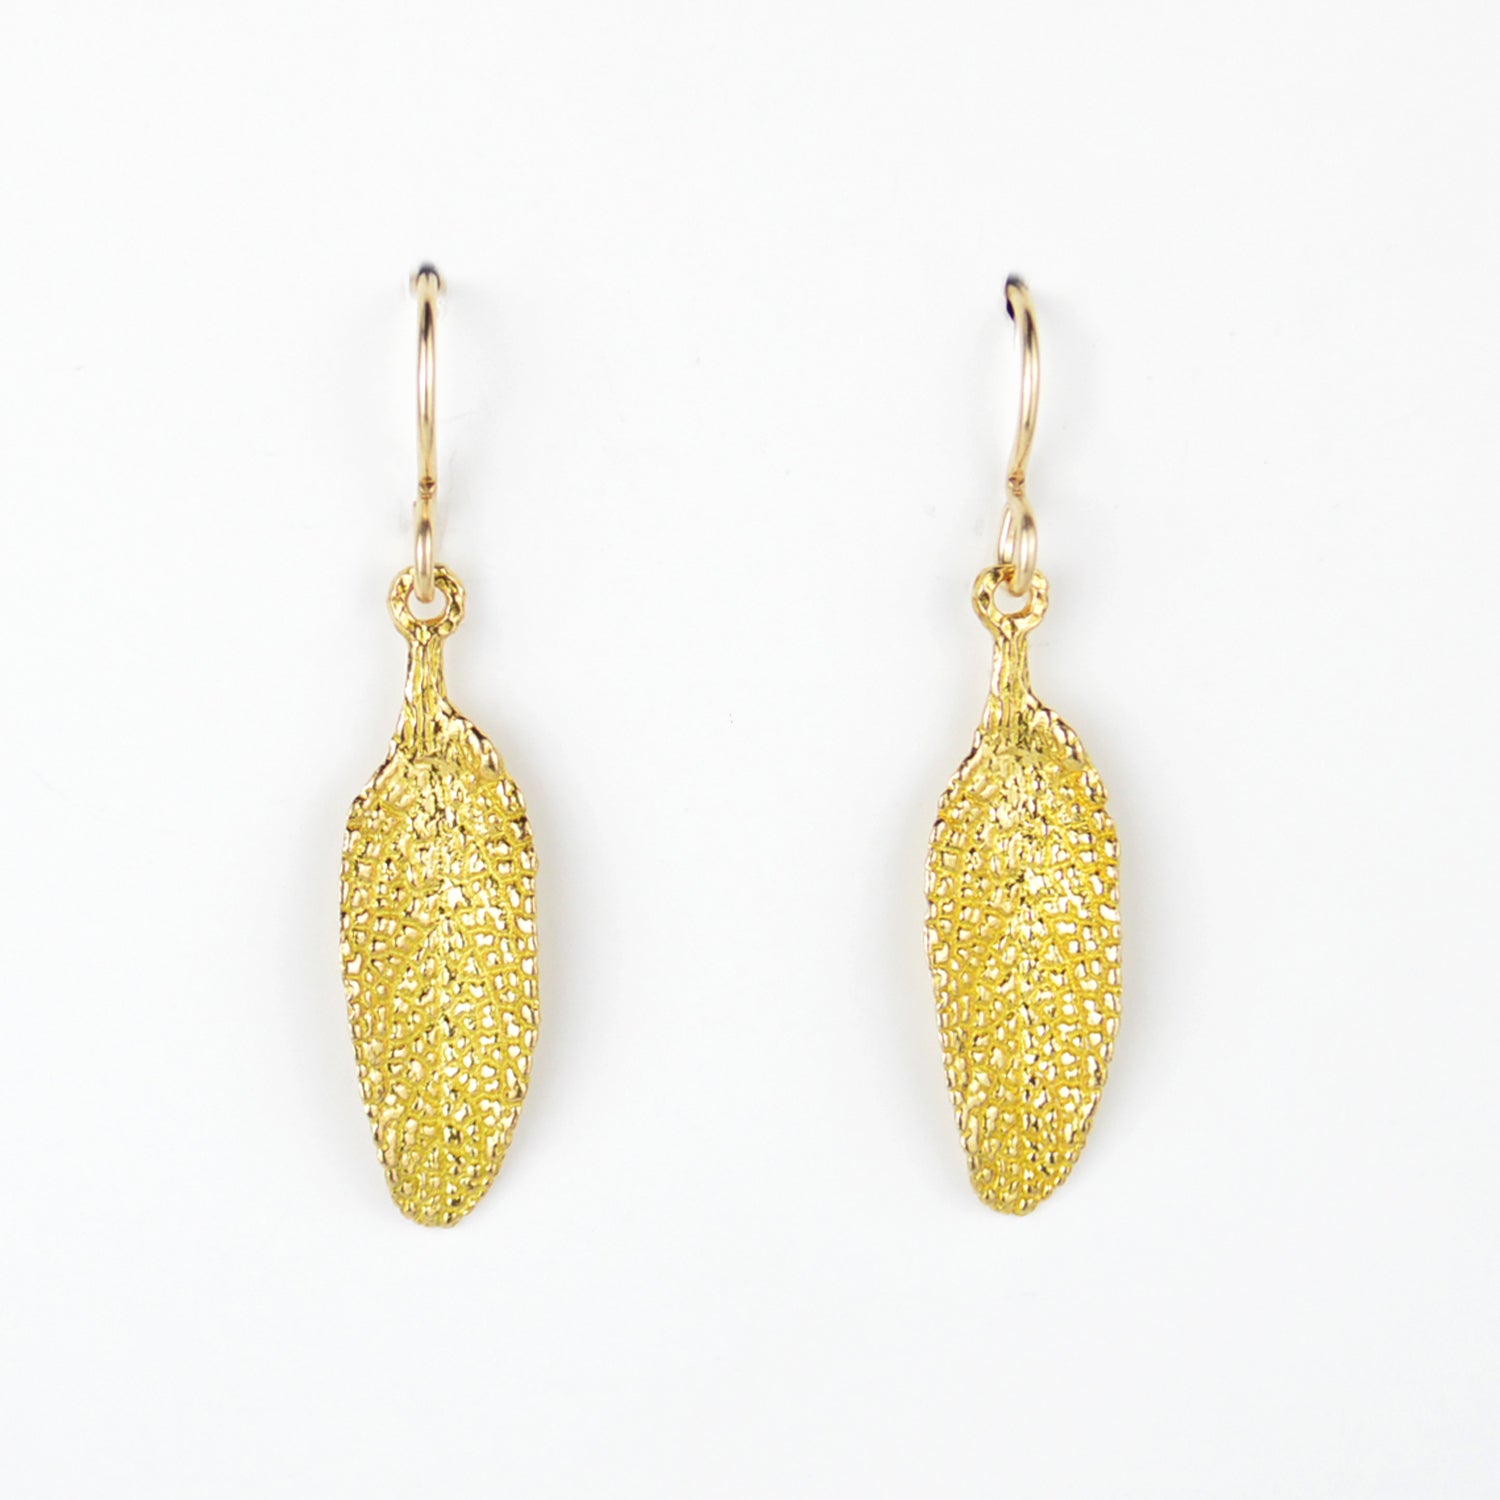 golden sage leaf earrings on plain white background. incredible detail